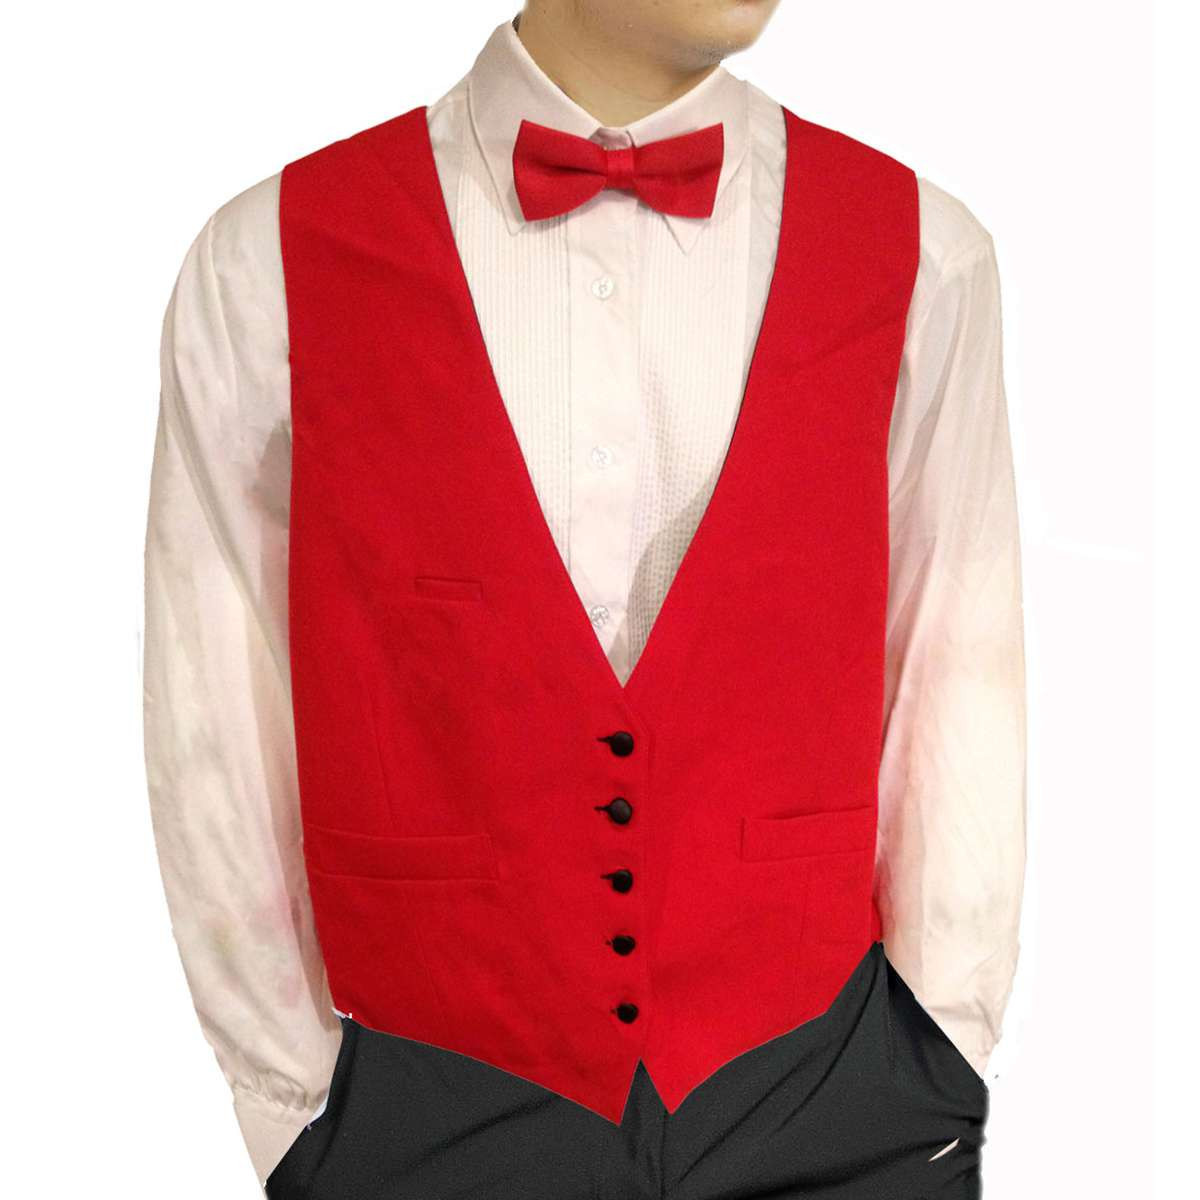 2 Sided Men's Red 5 Button Vest Reverses to Black